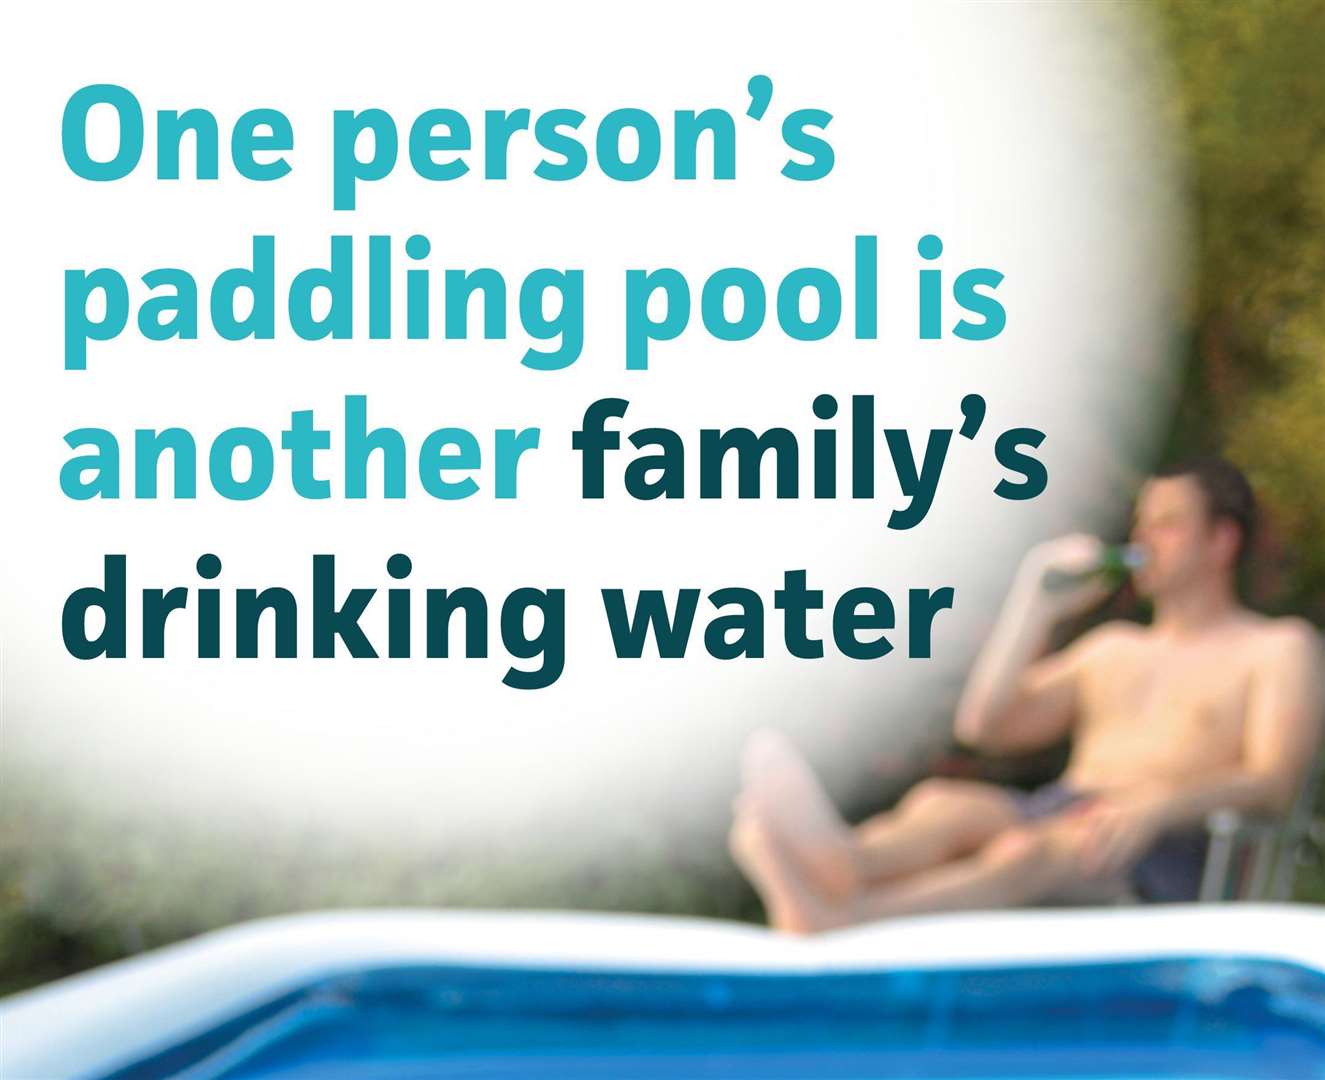 South East Water Poster being criticised online. Picture: @sewateruk